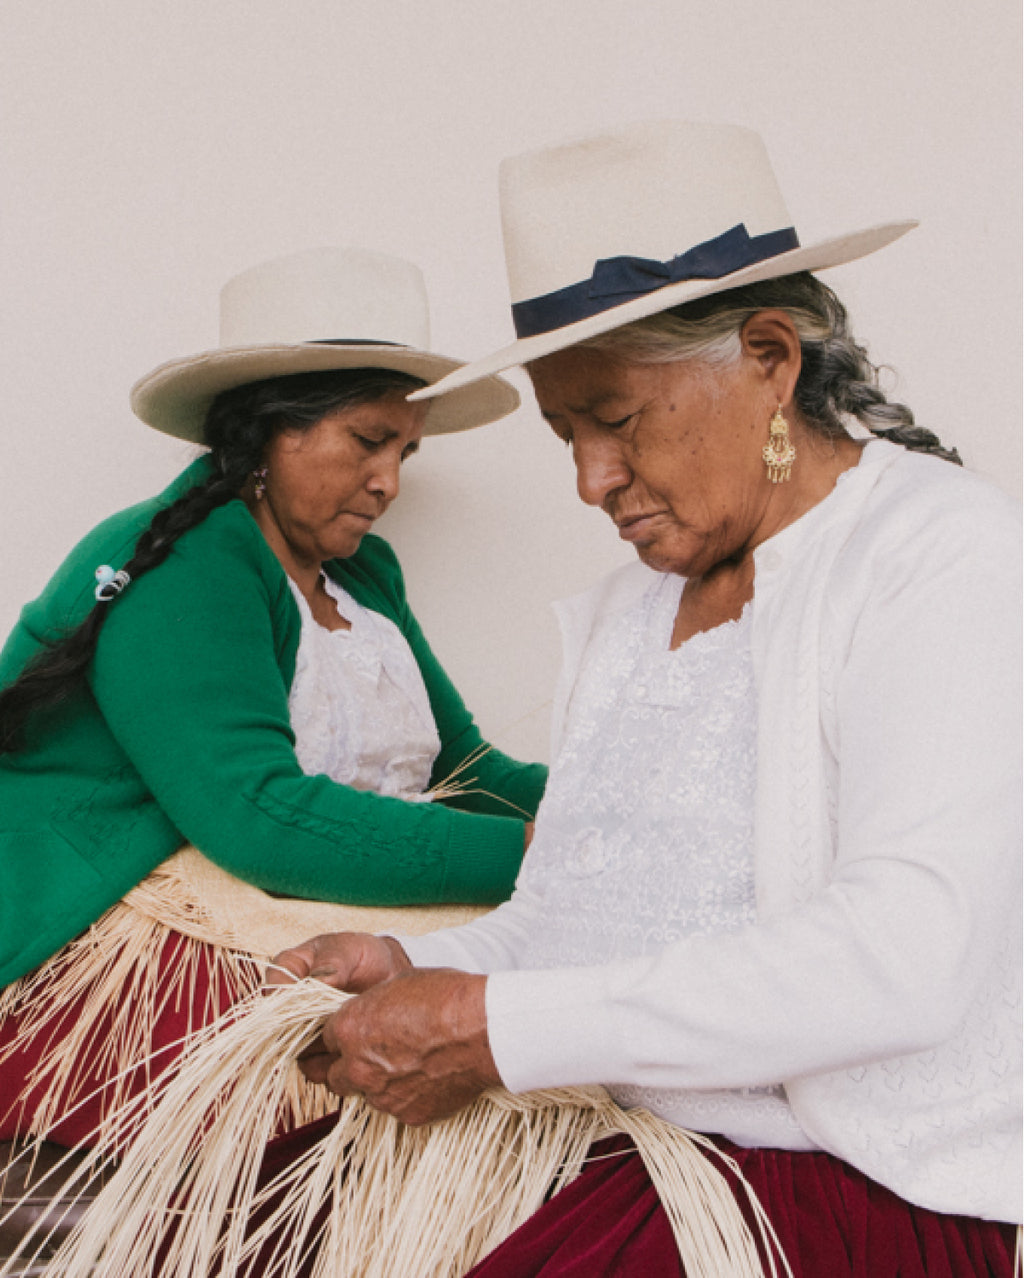 Two women weaving together.